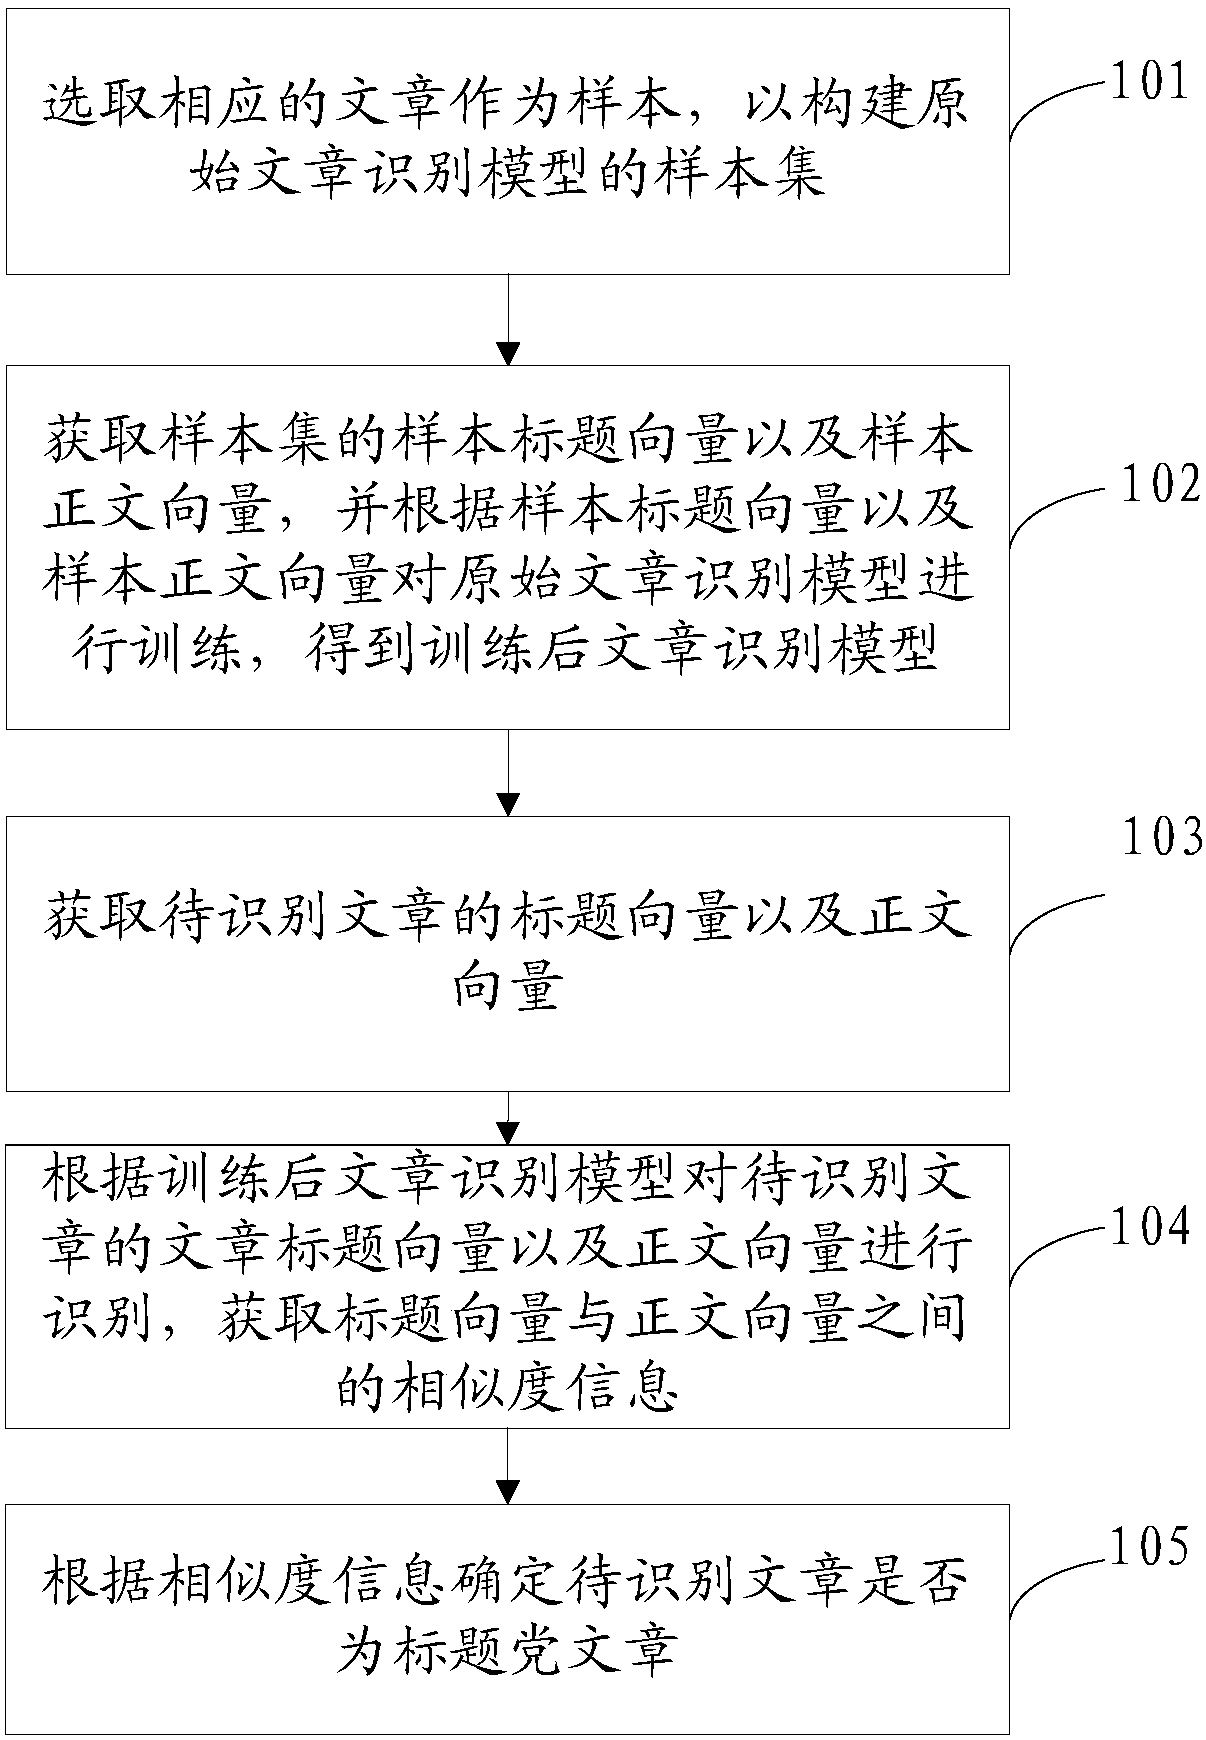 Article identification method and device, and storage medium